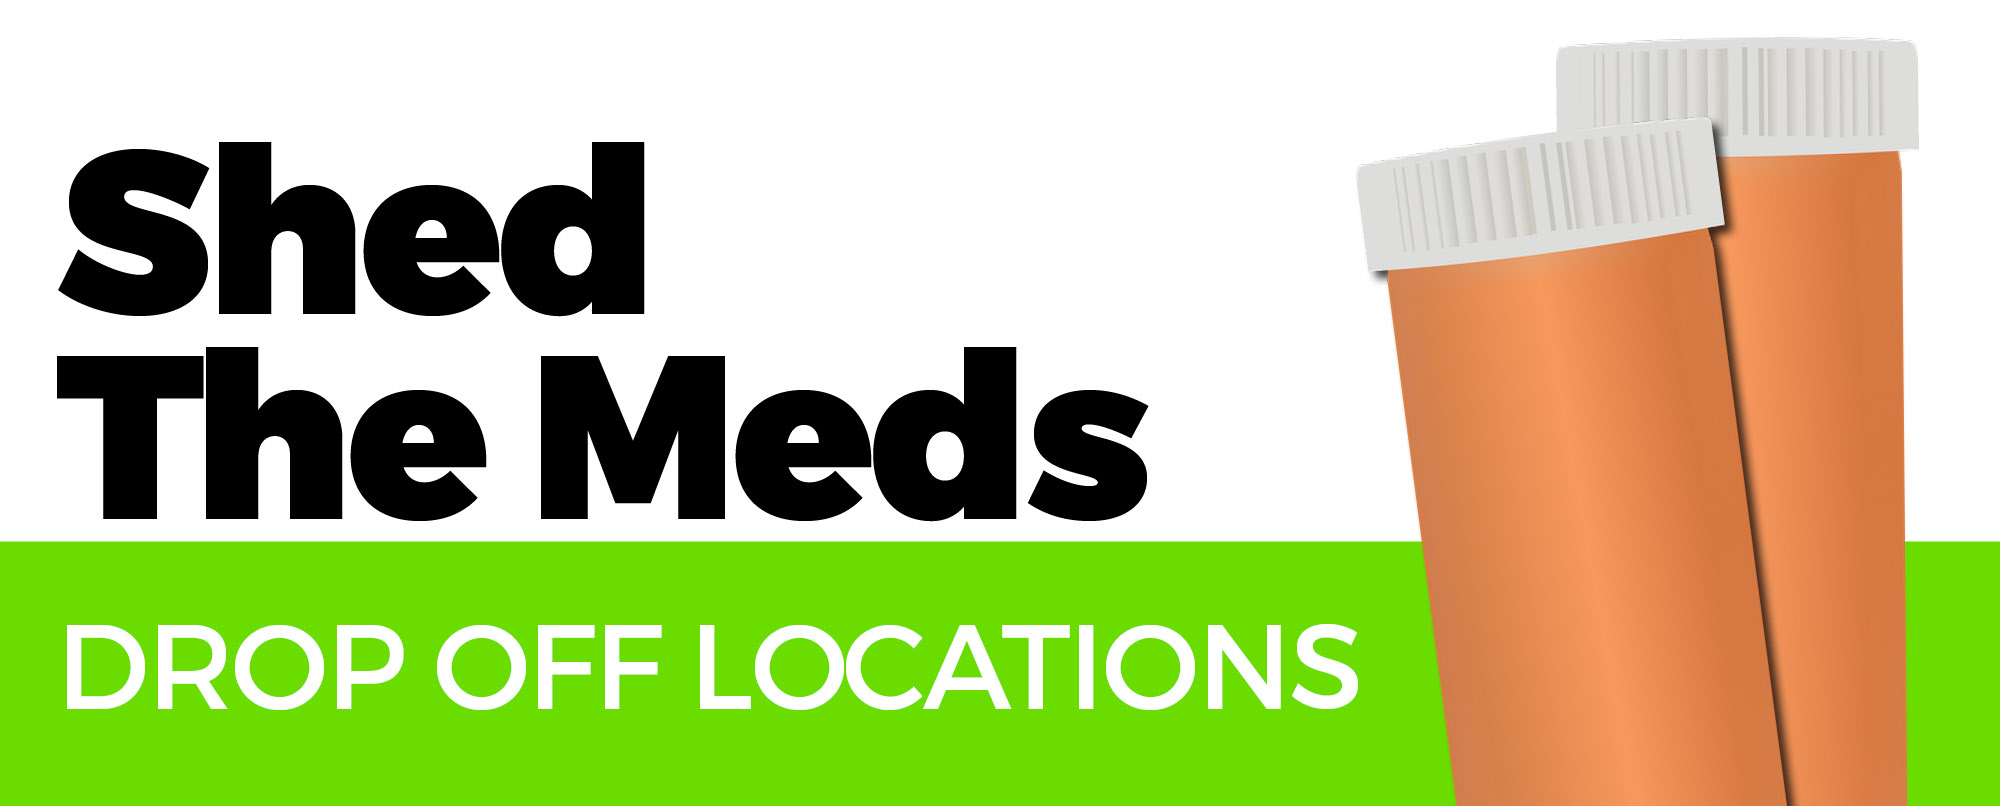 Shed the Meds Drop-Off Locations